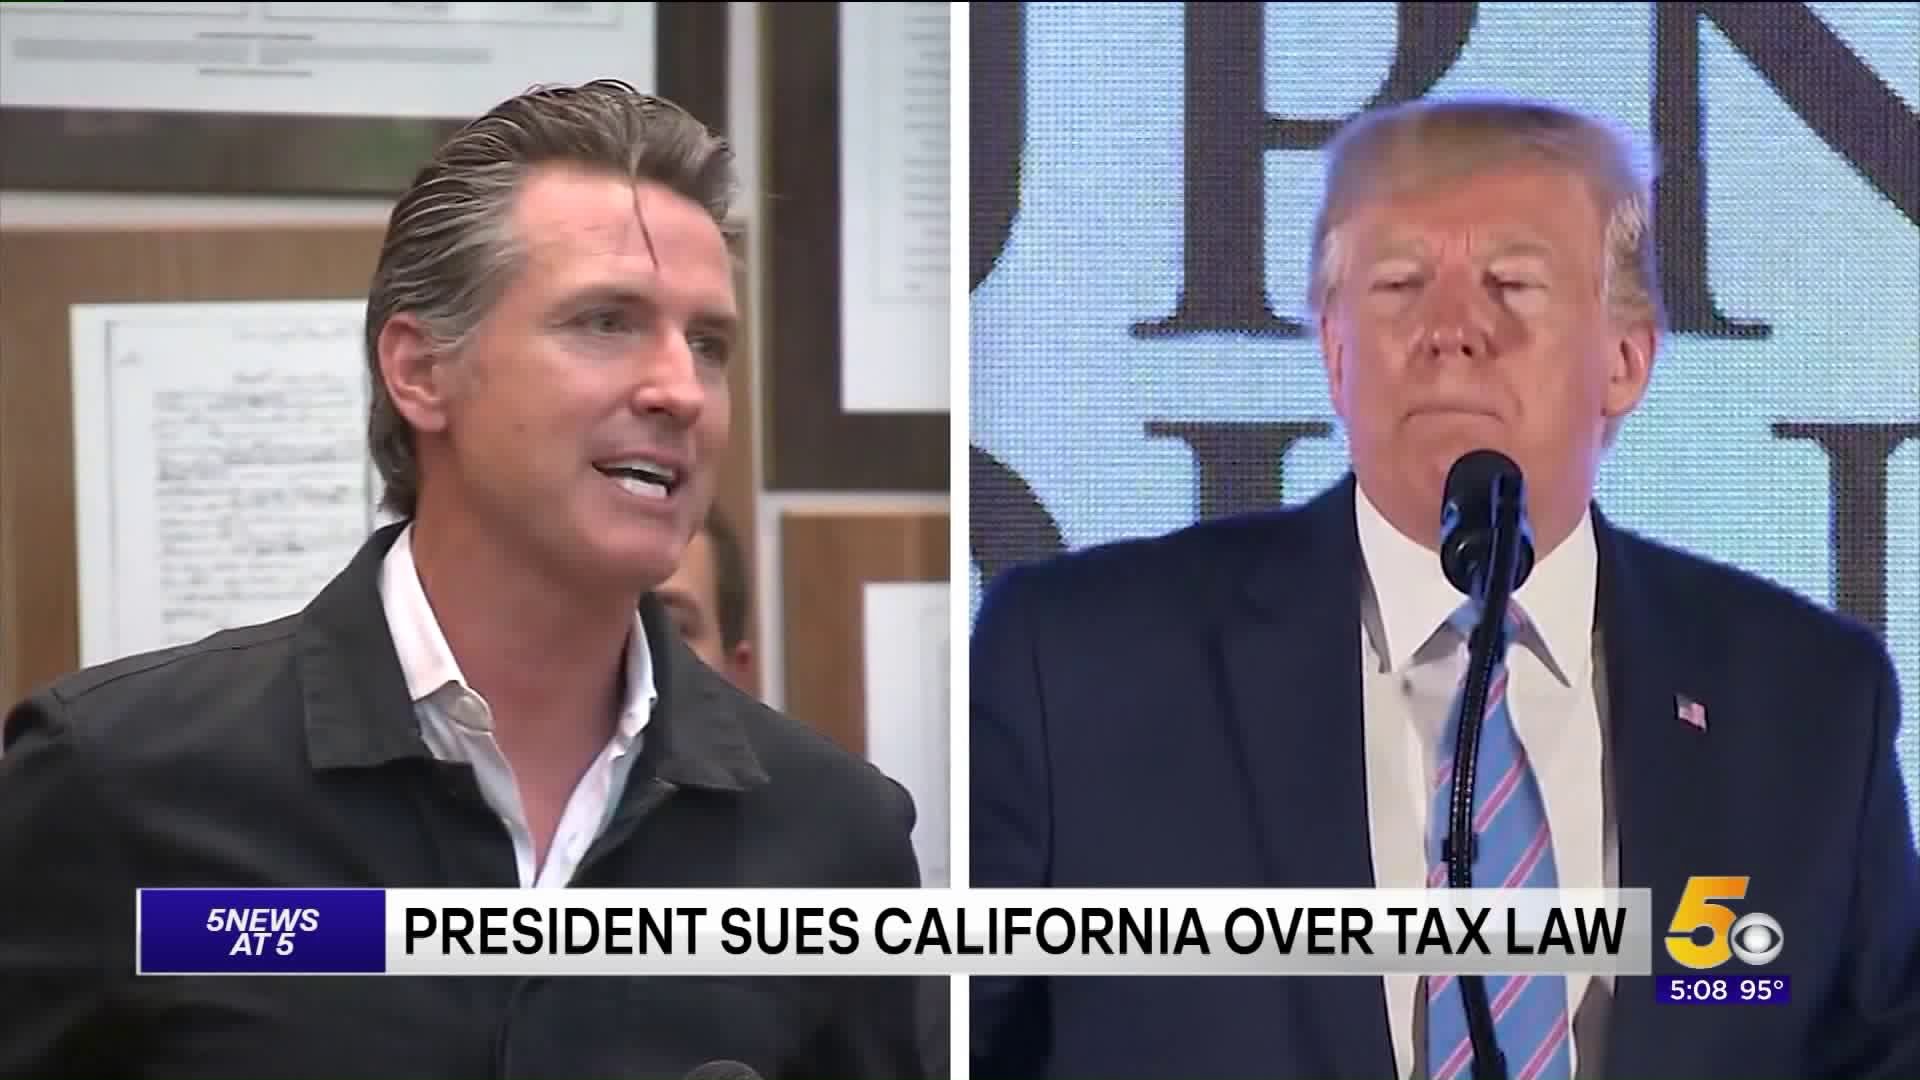 President Sues California Over Tax Law